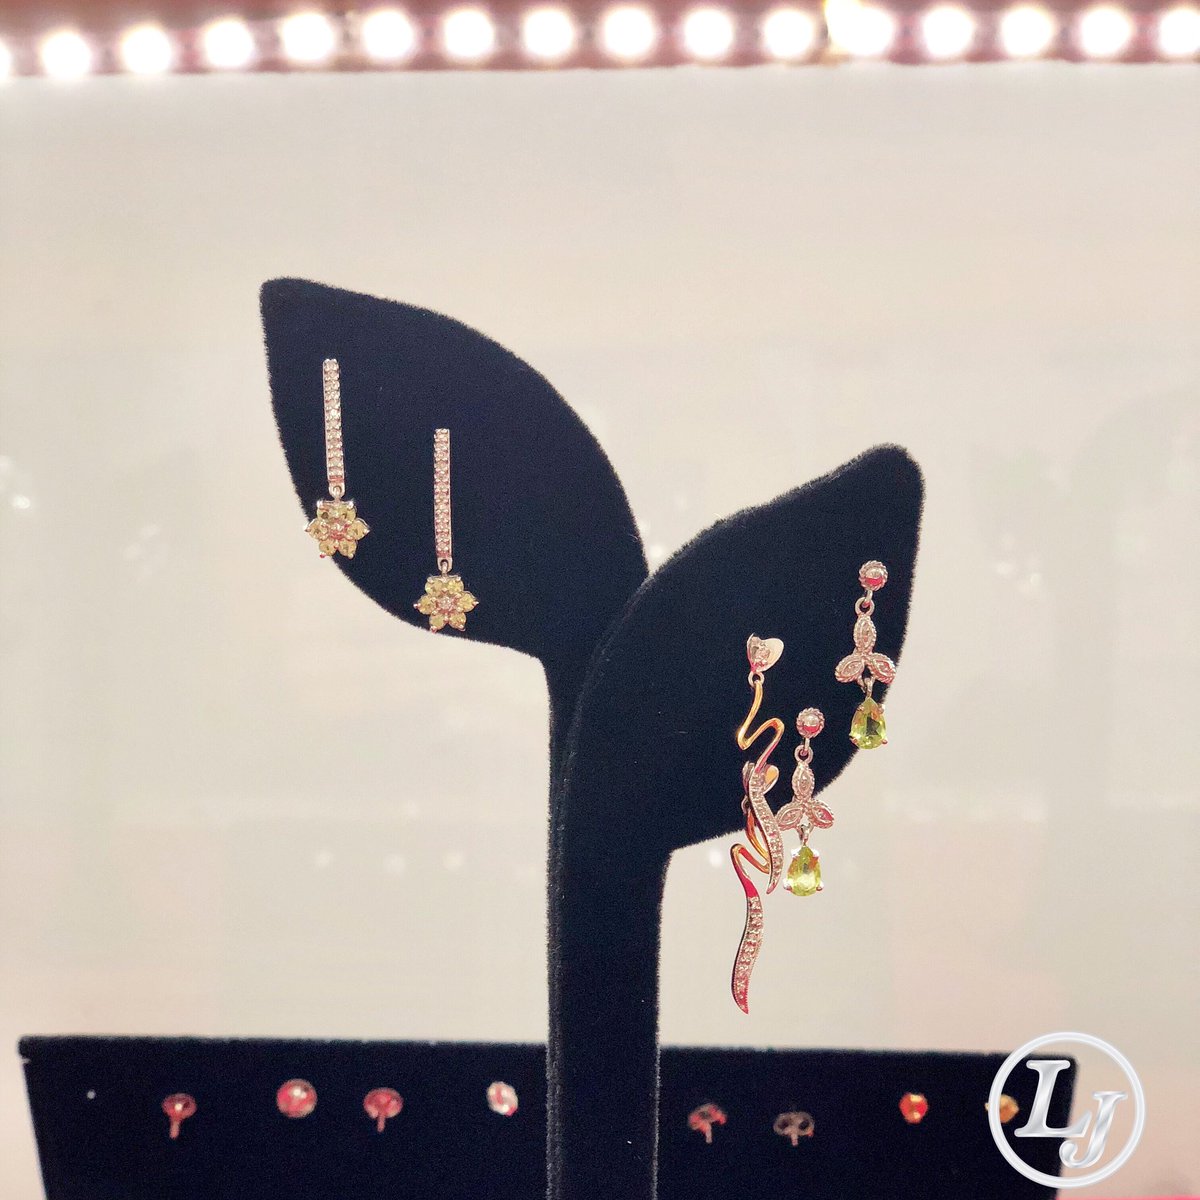 New arrivals! 💕 Enjoy our special prices 😍
.
.
Visit us: 3154 Bill Beck Blvd Kissimmee Fl 📍
.
.
#goodprices #jewelryideas #newarrivals #Earrings #Gold #twotones #Cute #Jewelry #jewelryinspiration